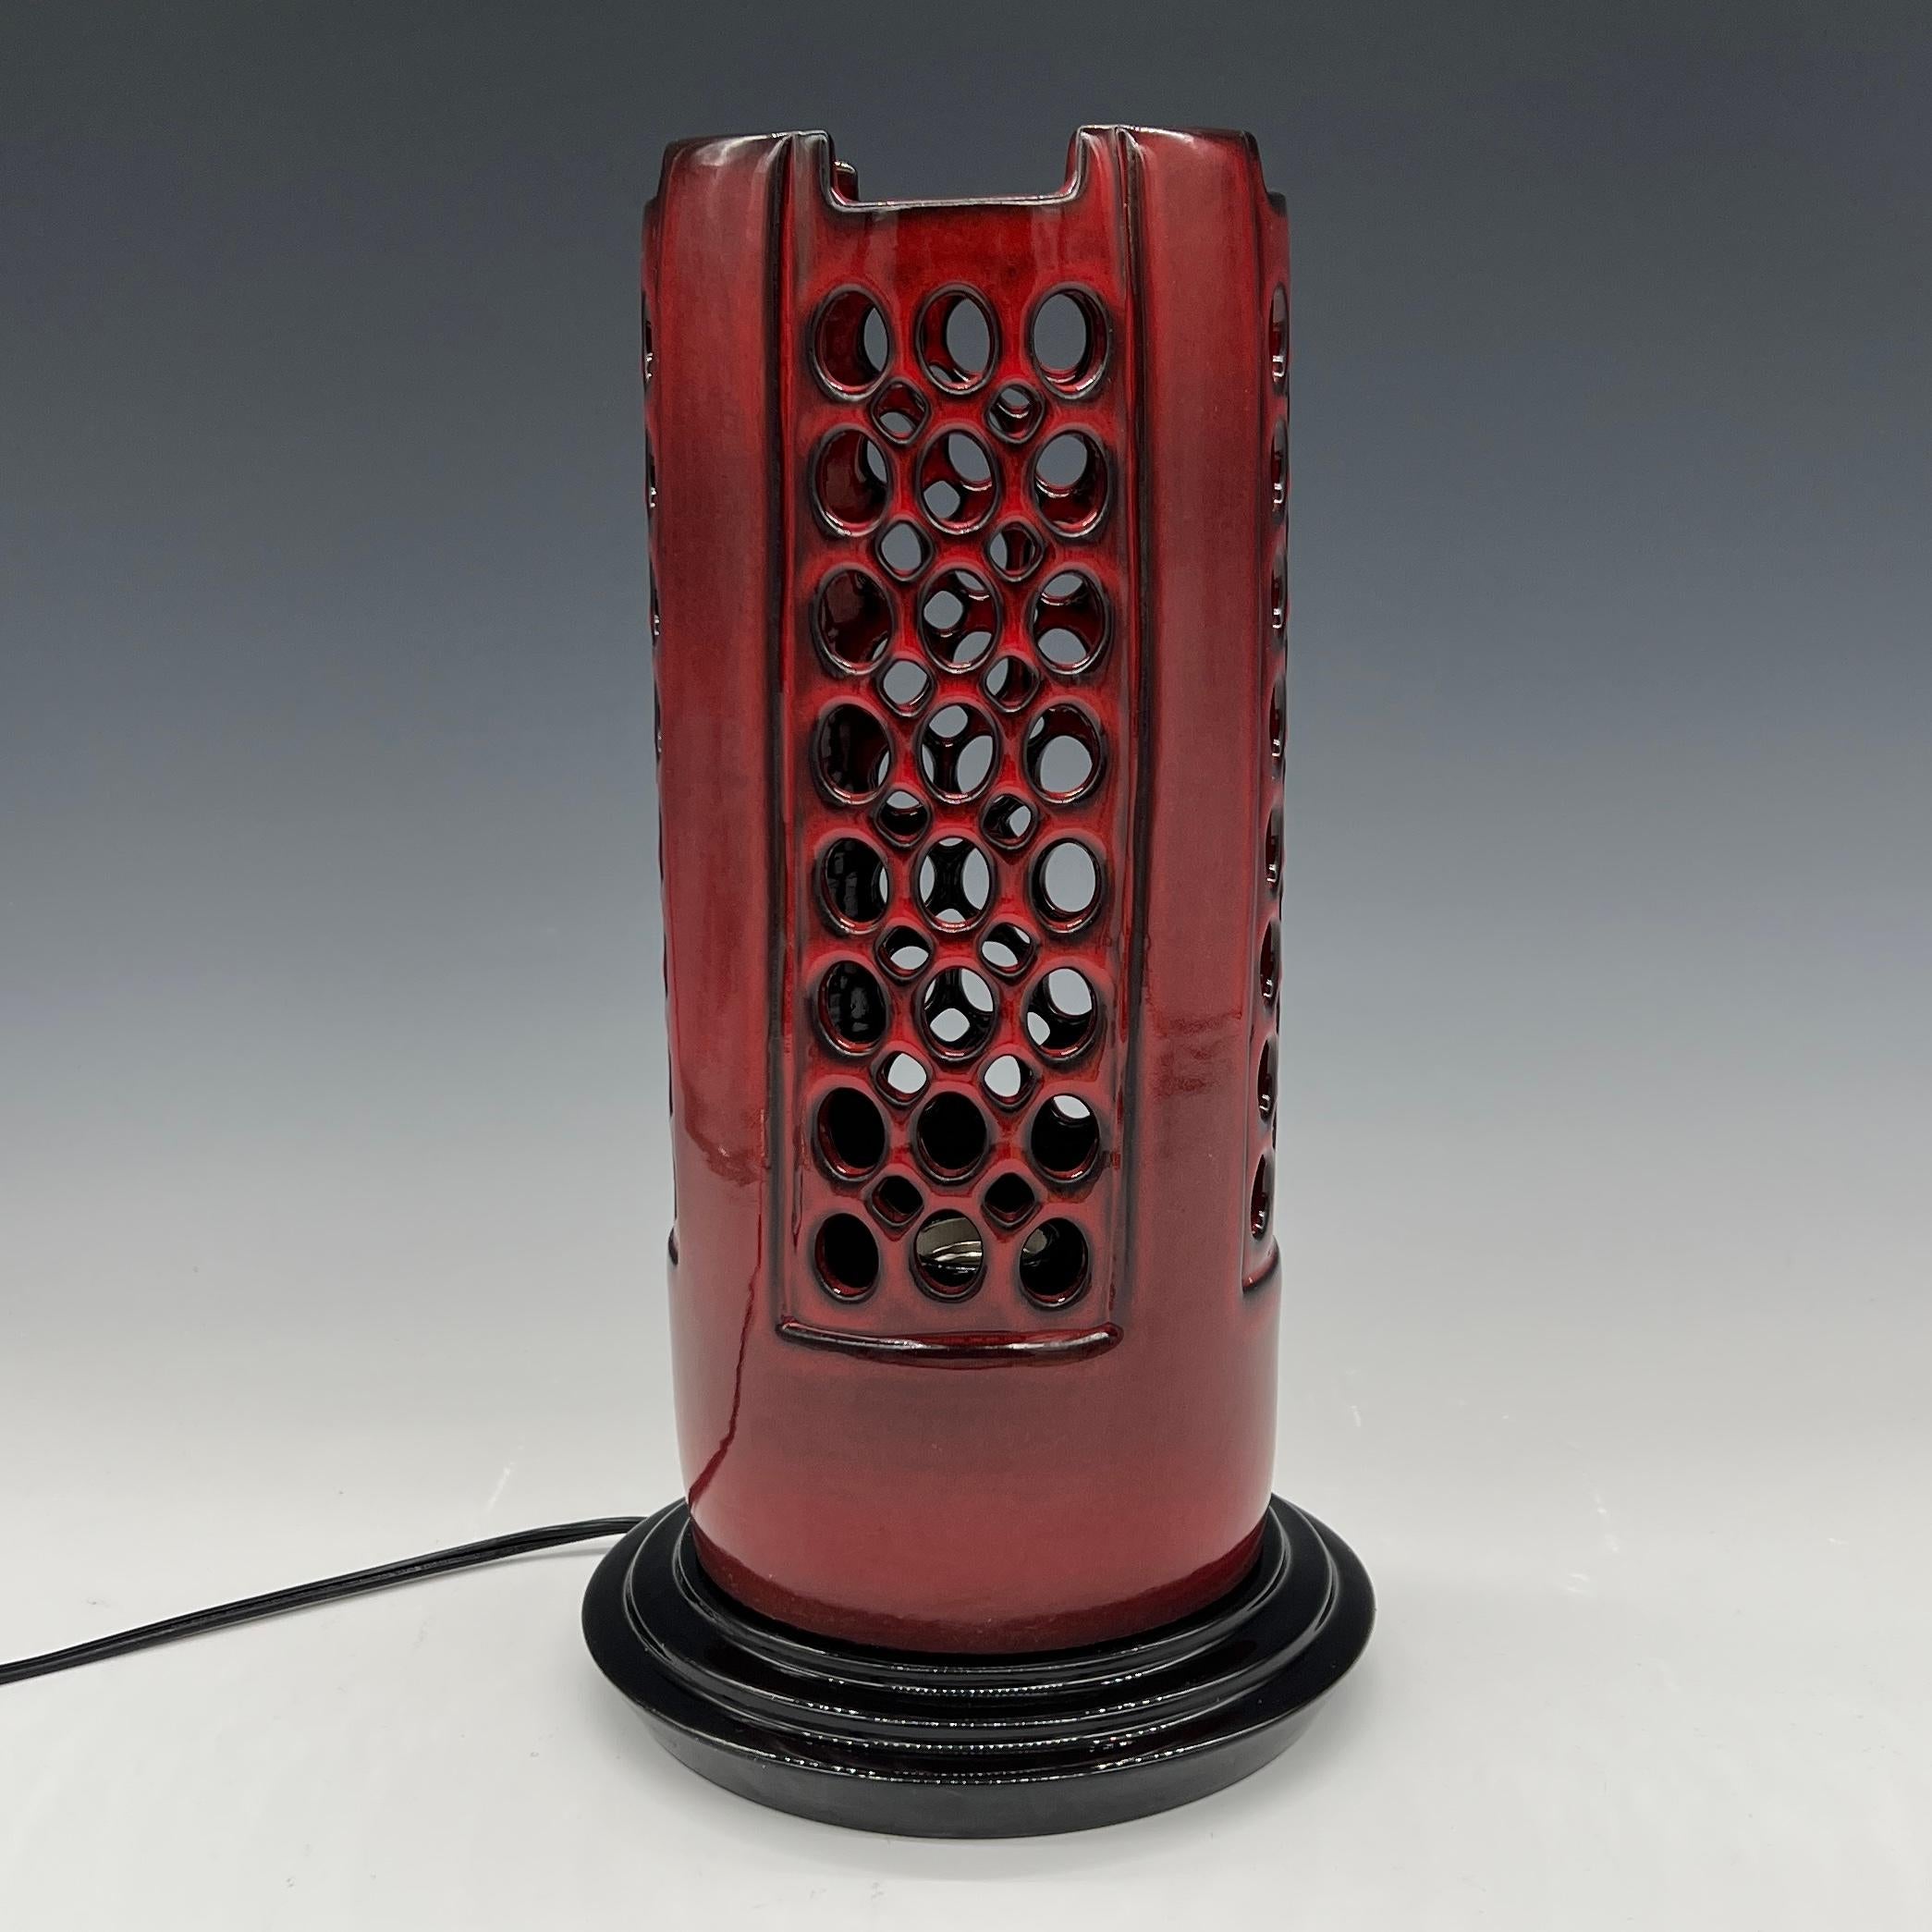 This lamp is wheel thrown and hand pierced with a vibrant, glossy red glaze that urns black at the rim and edges.
The base is wheel thrown ceramic with a glassy black glaze
Black cord and switch.
Can be used with any wattage bulb.